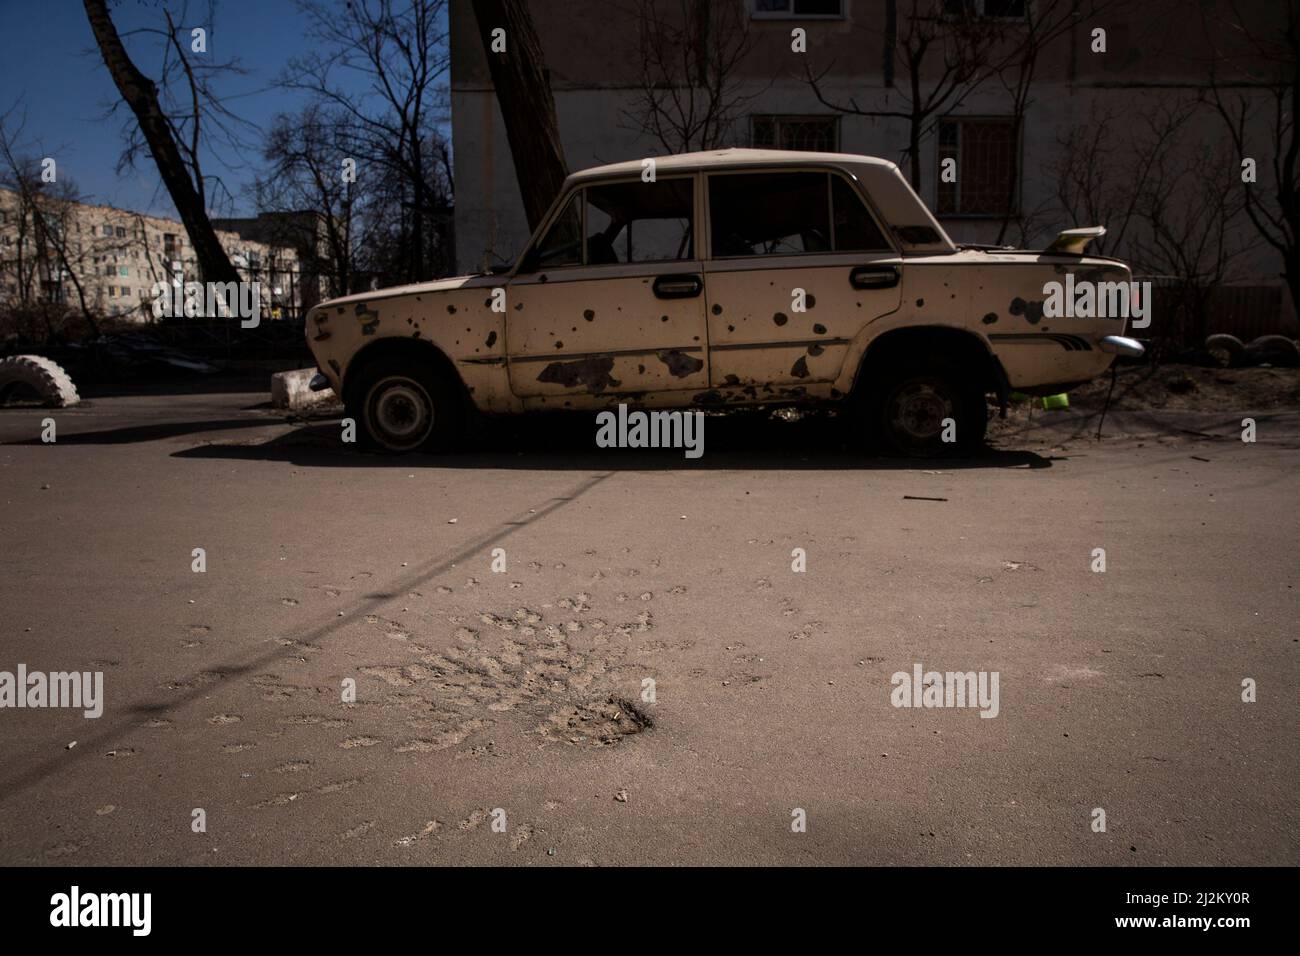 Okhtyrka, Sumy, Ukraine. 2nd Apr, 2022. A car is damaged by shrapnel after a Russian shell landed nearby at Okhtyrka, Ukraine on April 2, 2022. The asphalt below the car shows where the shell landed (Credit Image: © Daniel Carde/ZUMA Press Wire) Credit: ZUMA Press, Inc./Alamy Live News Stock Photo